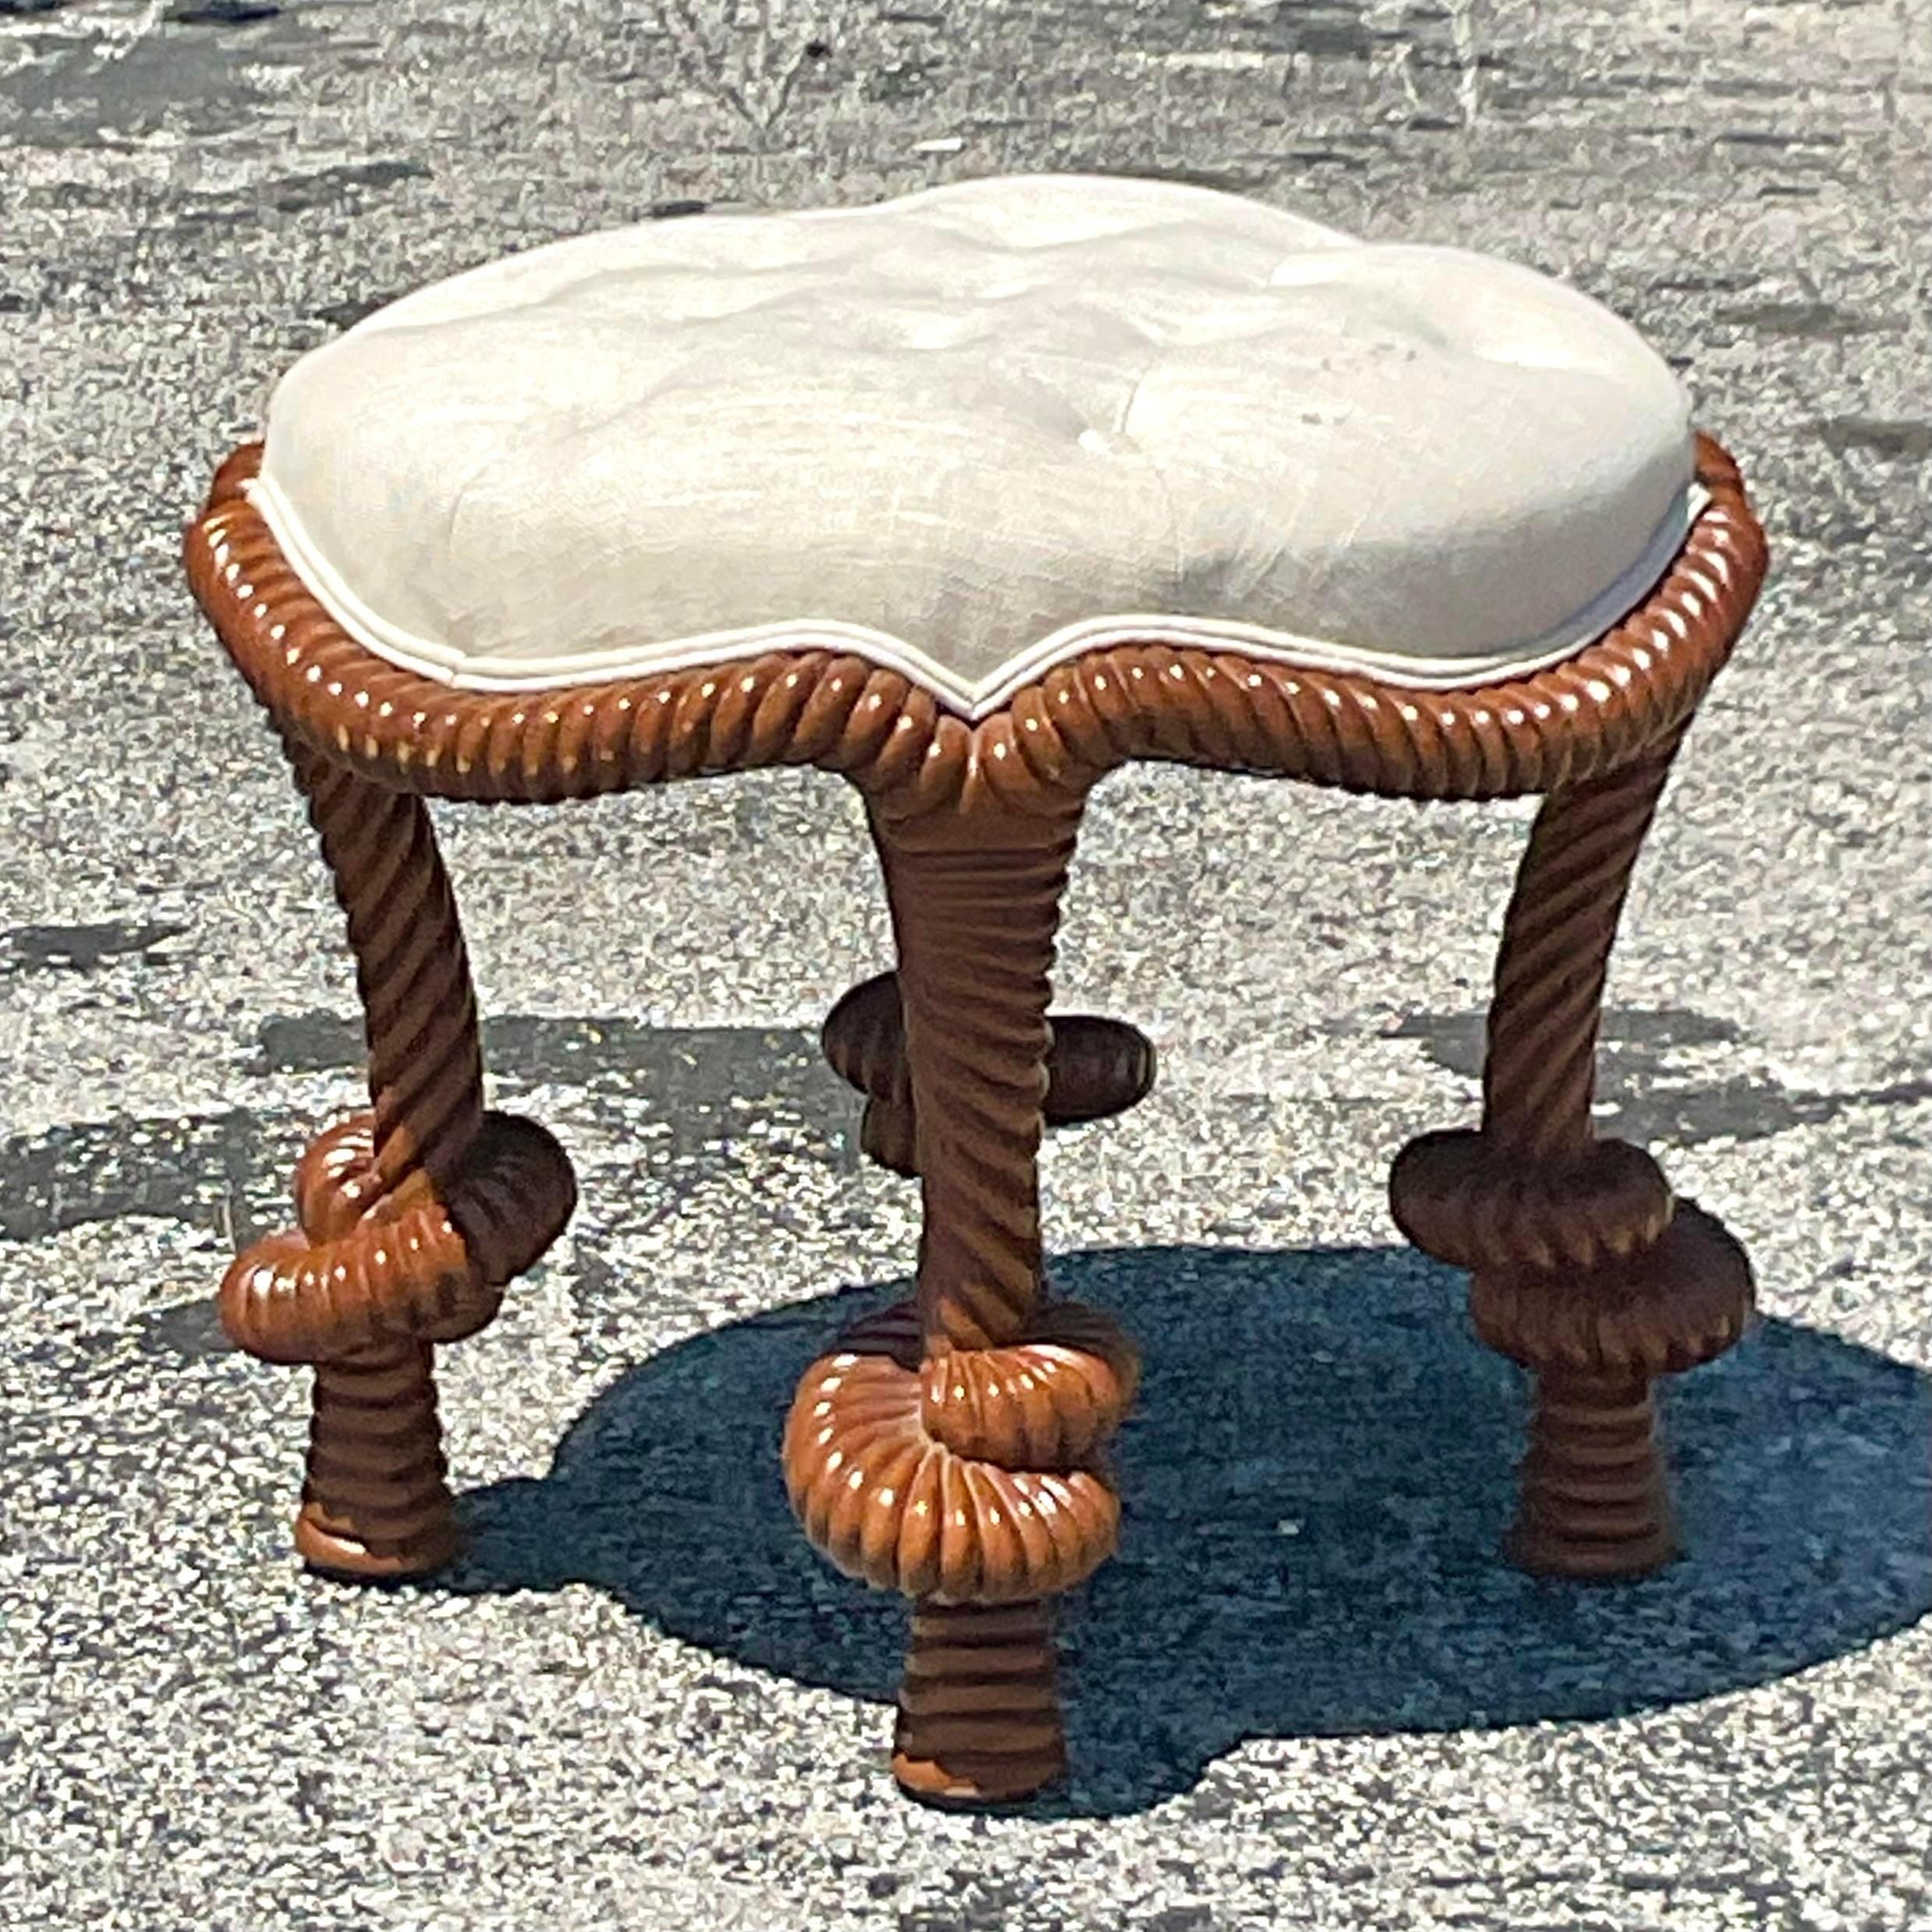 20th Century Vintage Regency Carved Knot Tufted Low Stool